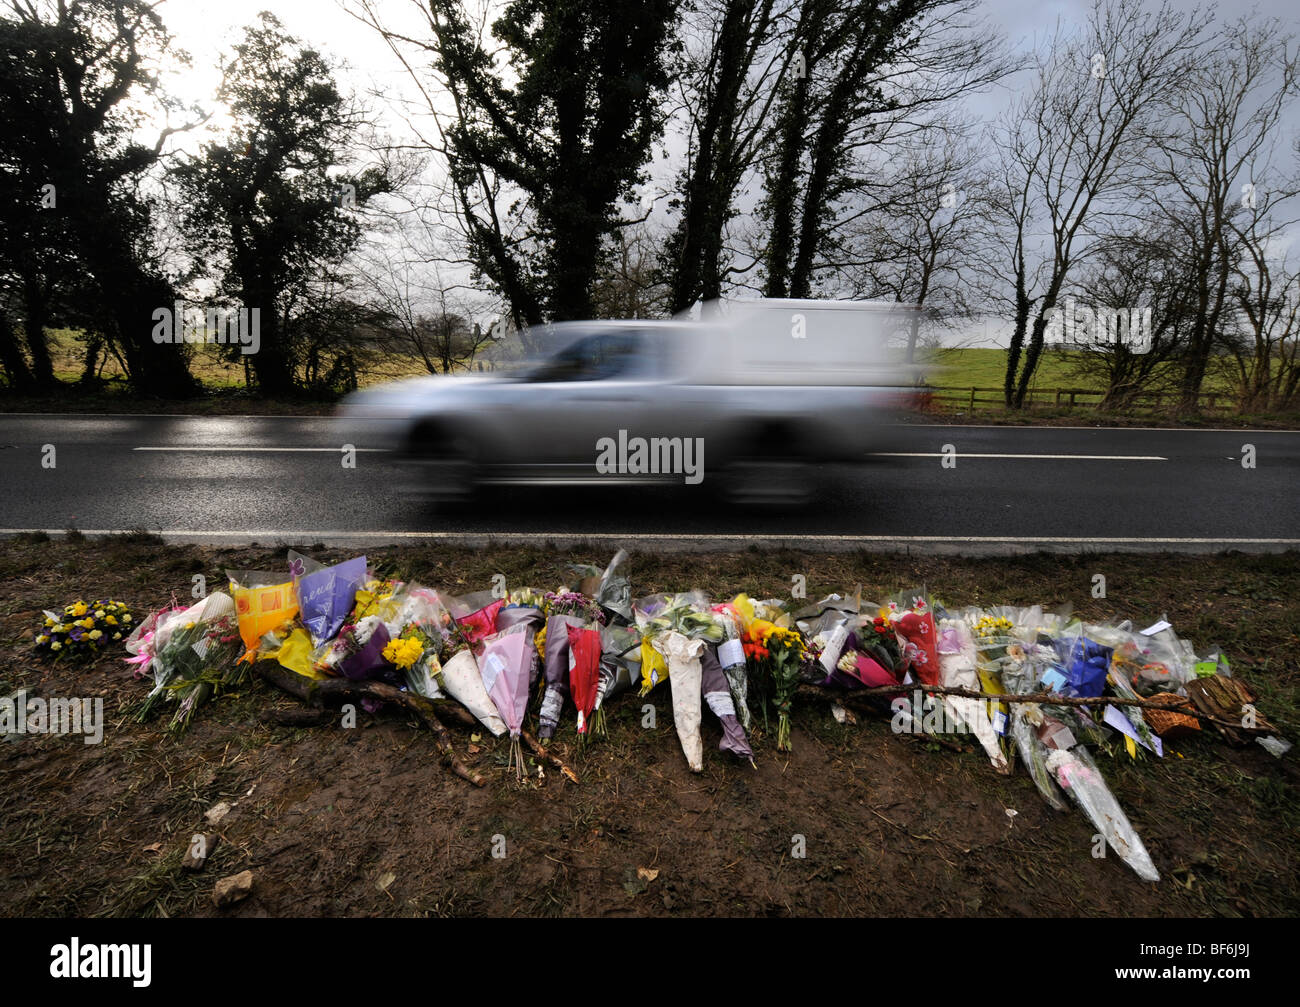 A roadside memorial on the A429 north of Stow-on-the-Wold, Gloucestershire where an accident on 7 March 2008 involving convicted Stock Photo